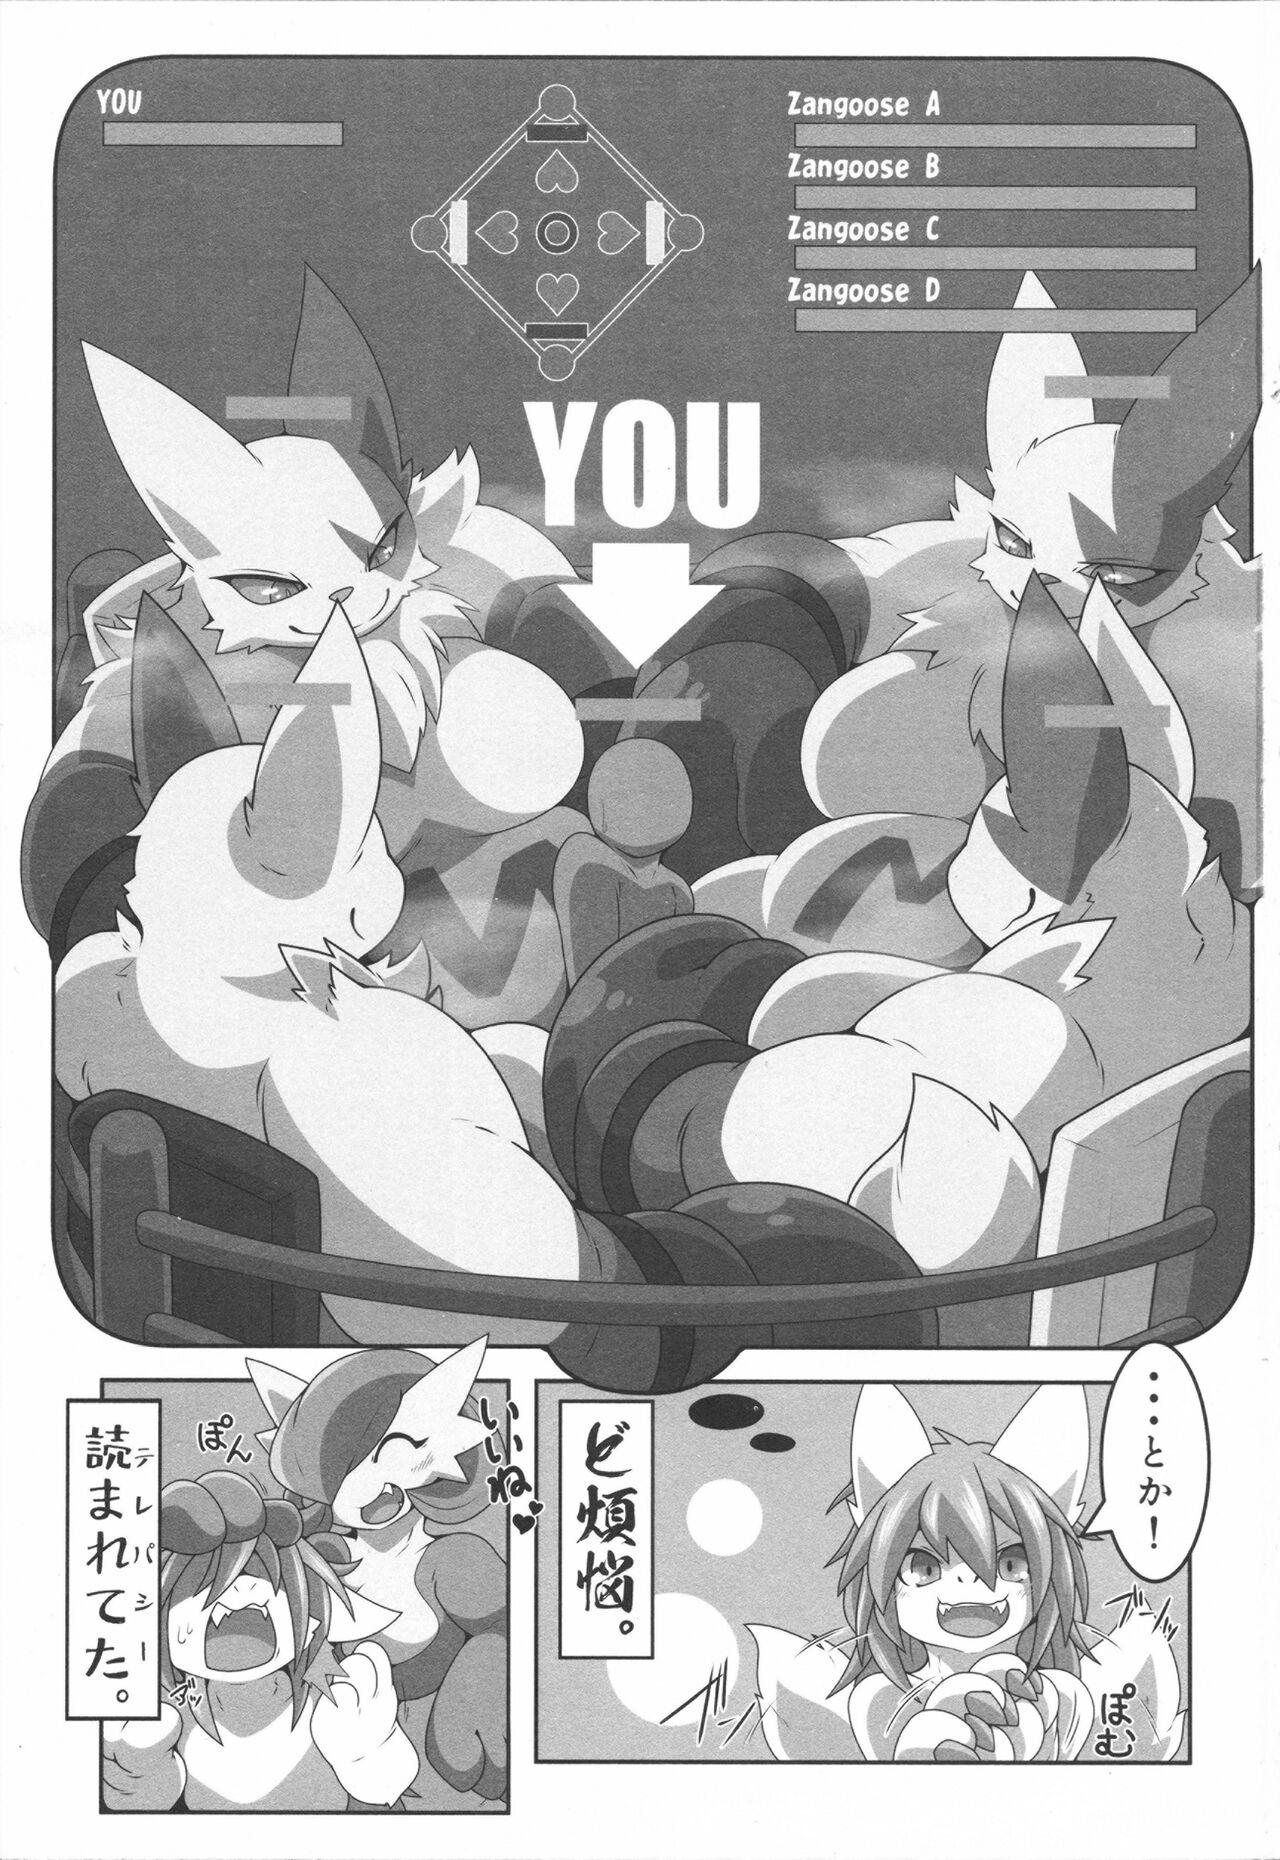 Public Sex Dominated 5 - Pokemon | pocket monsters Stud - Picture 2